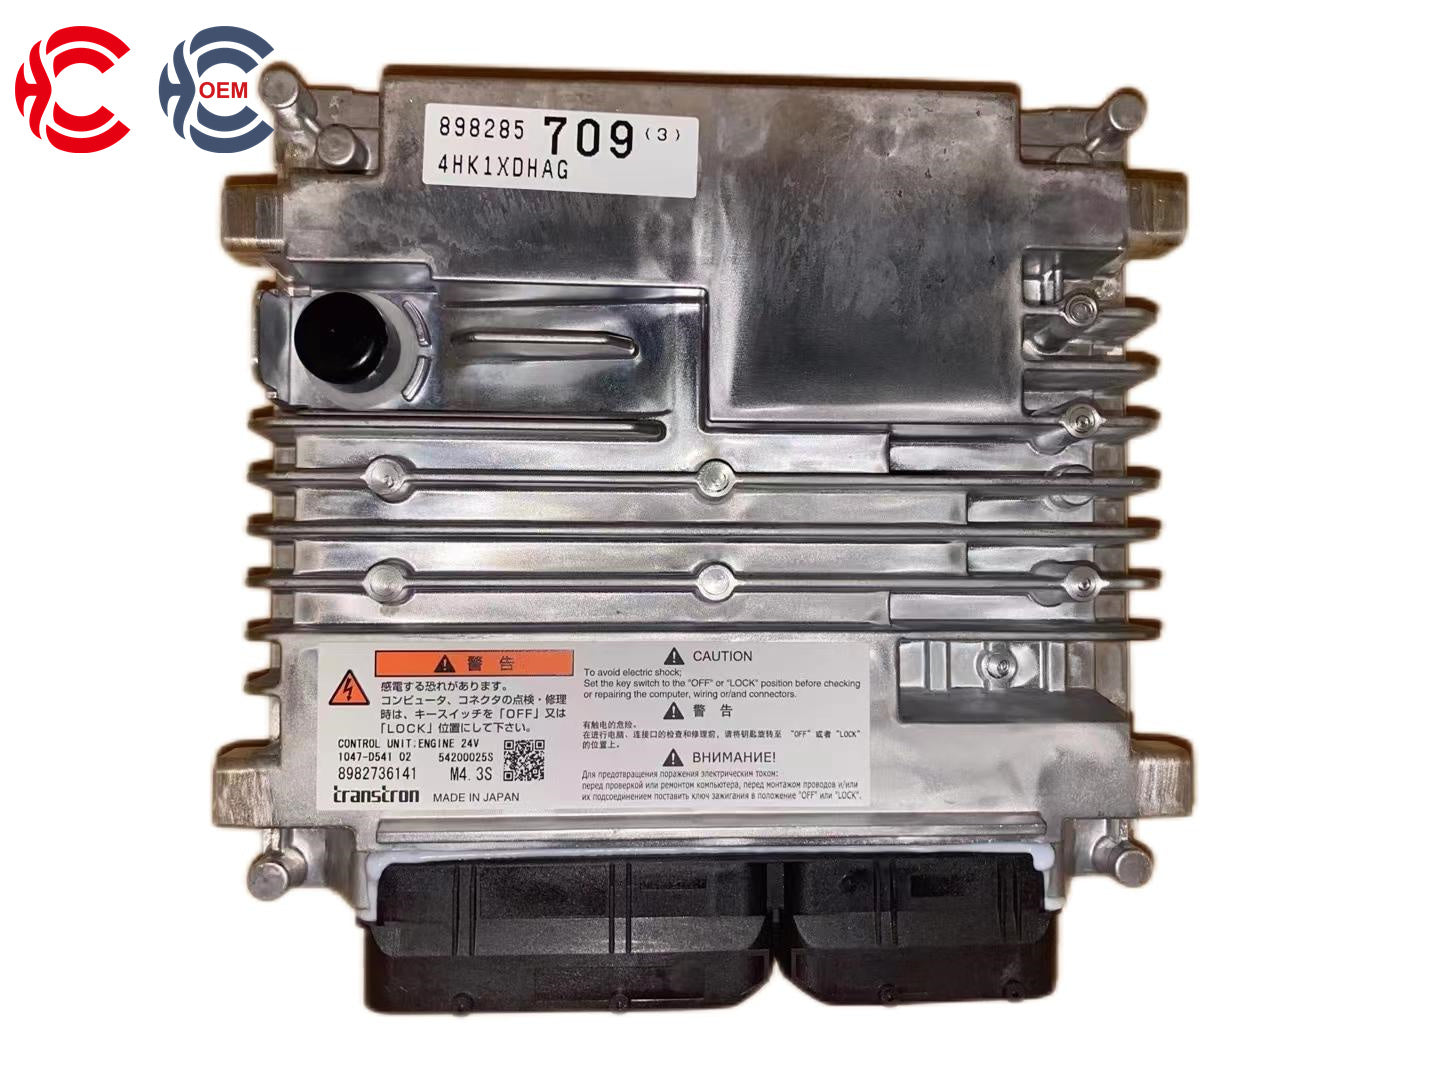 OEM: 8982736141 1047-D541 54200025SMaterial: MetalColor: SilverOrigin: Made in ChinaWeight: 1500gPacking List: 1* ECU Diesel Engine More ServiceWe can provide OEM Manufacturing serviceWe can Be your one-step solution for Auto PartsWe can provide technical scheme for you Feel Free to Contact Us, We will get back to you as soon as possible.